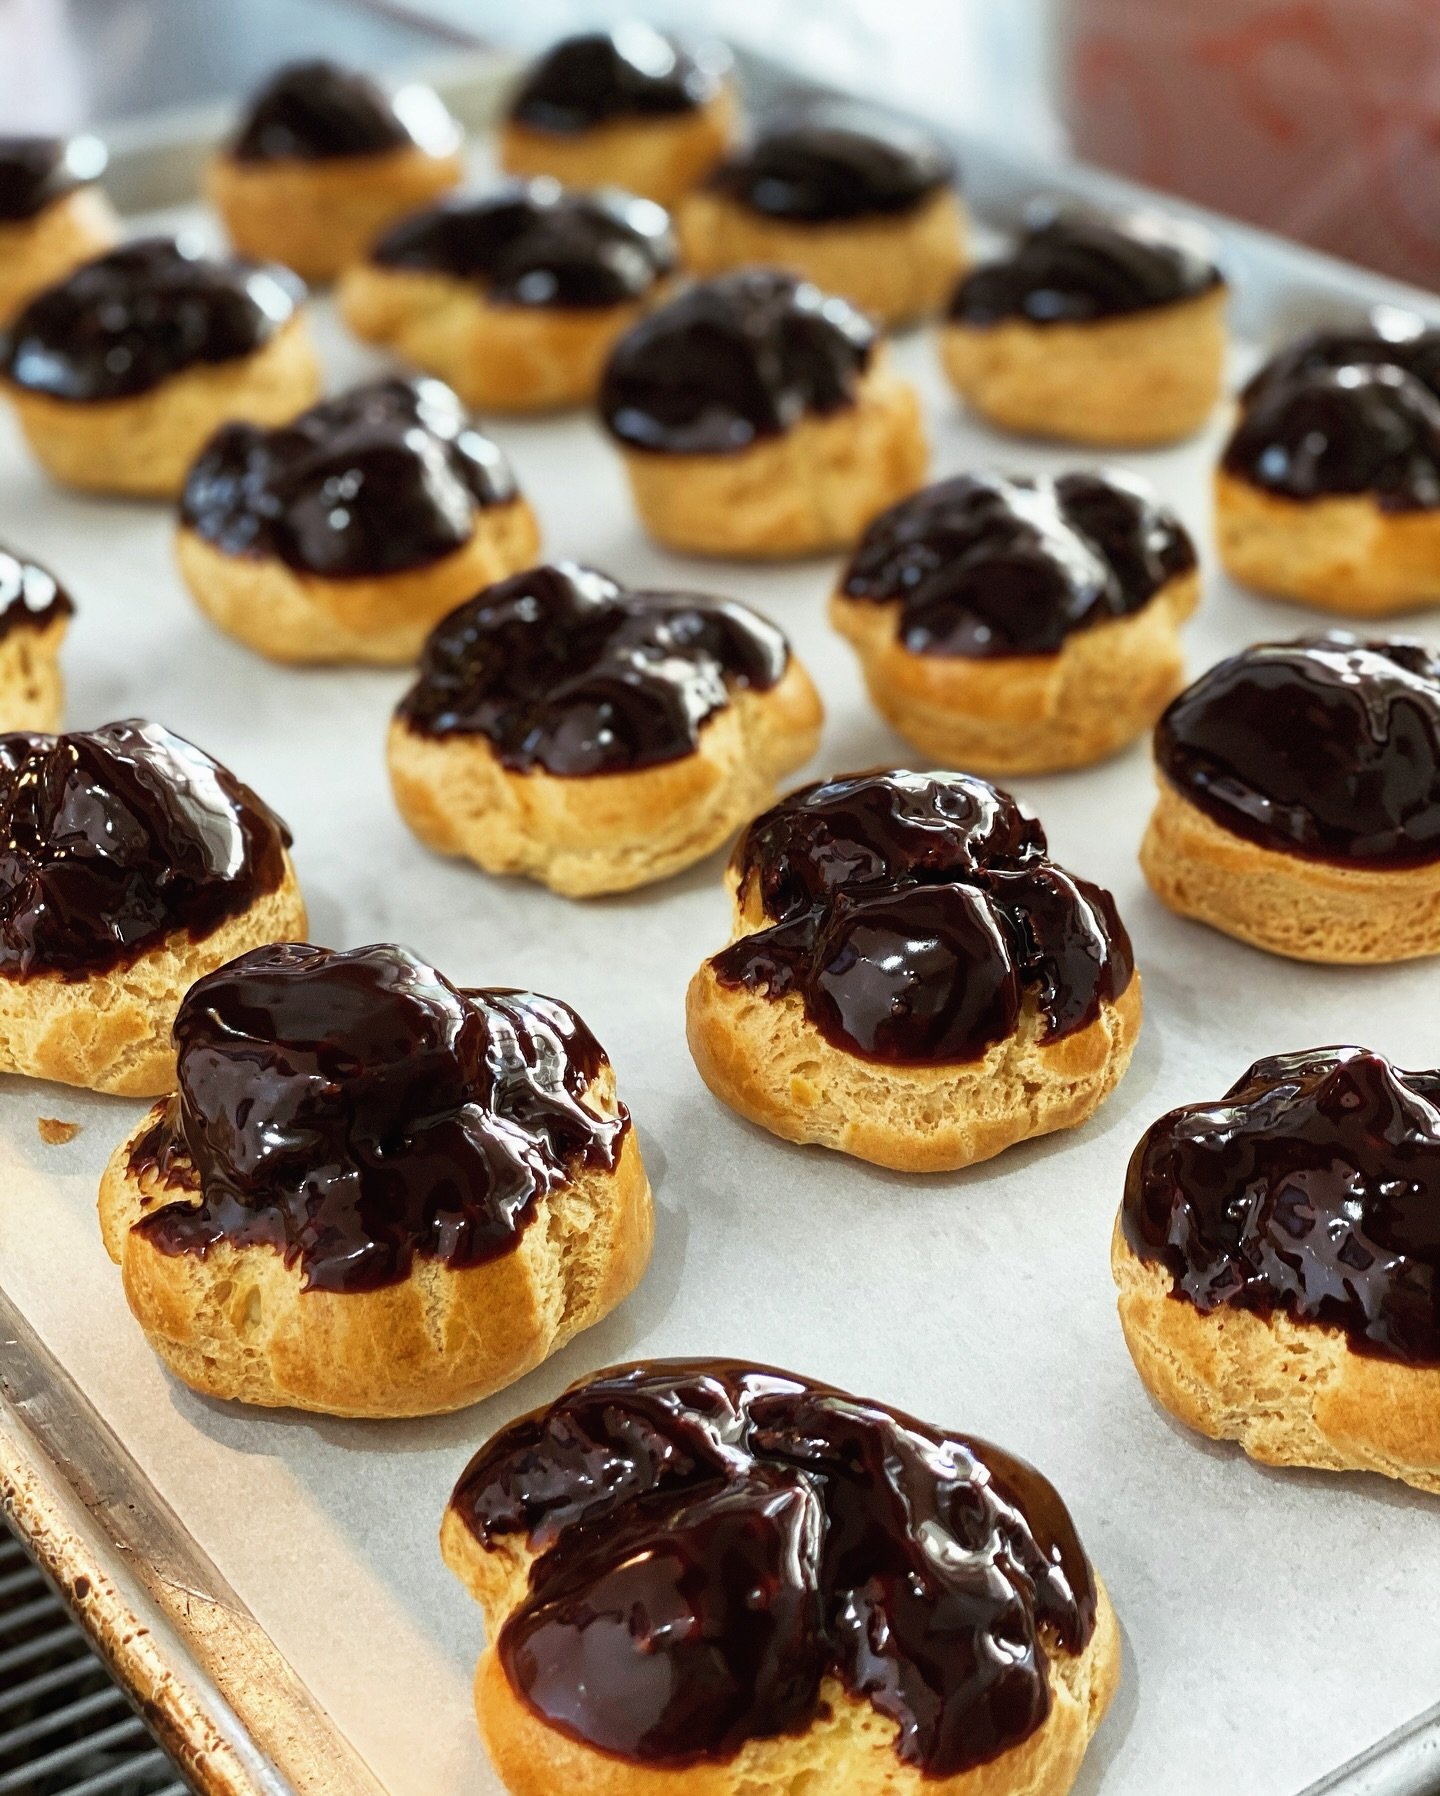 Choux &agrave; la cr&egrave;me&hellip;French choux pastry ball either custard filling, and dipped in chocolate 🤌